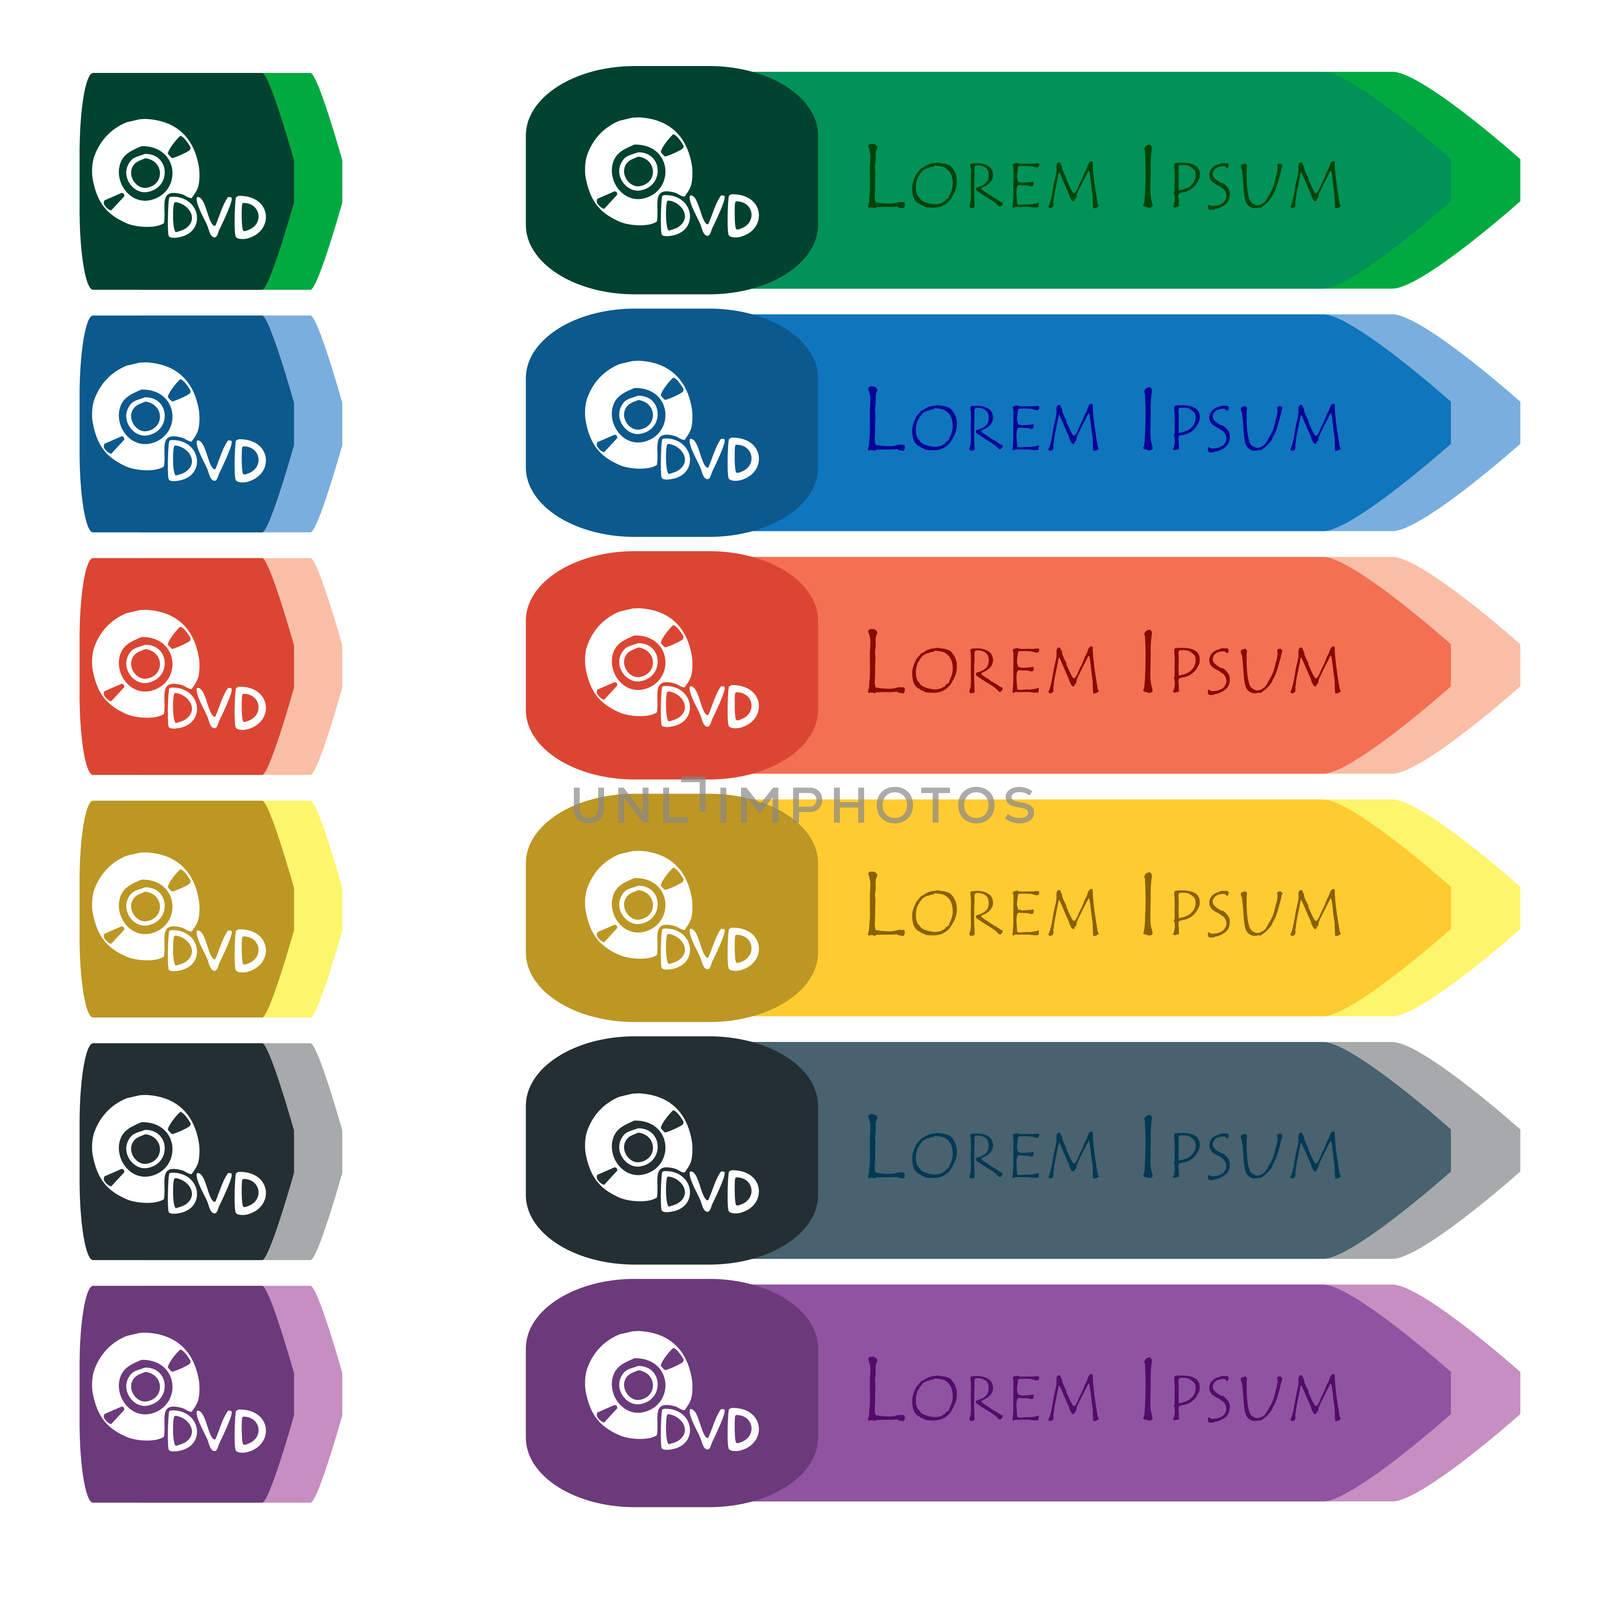 dvd icon sign. Set of colorful, bright long buttons with additional small modules. Flat design. 